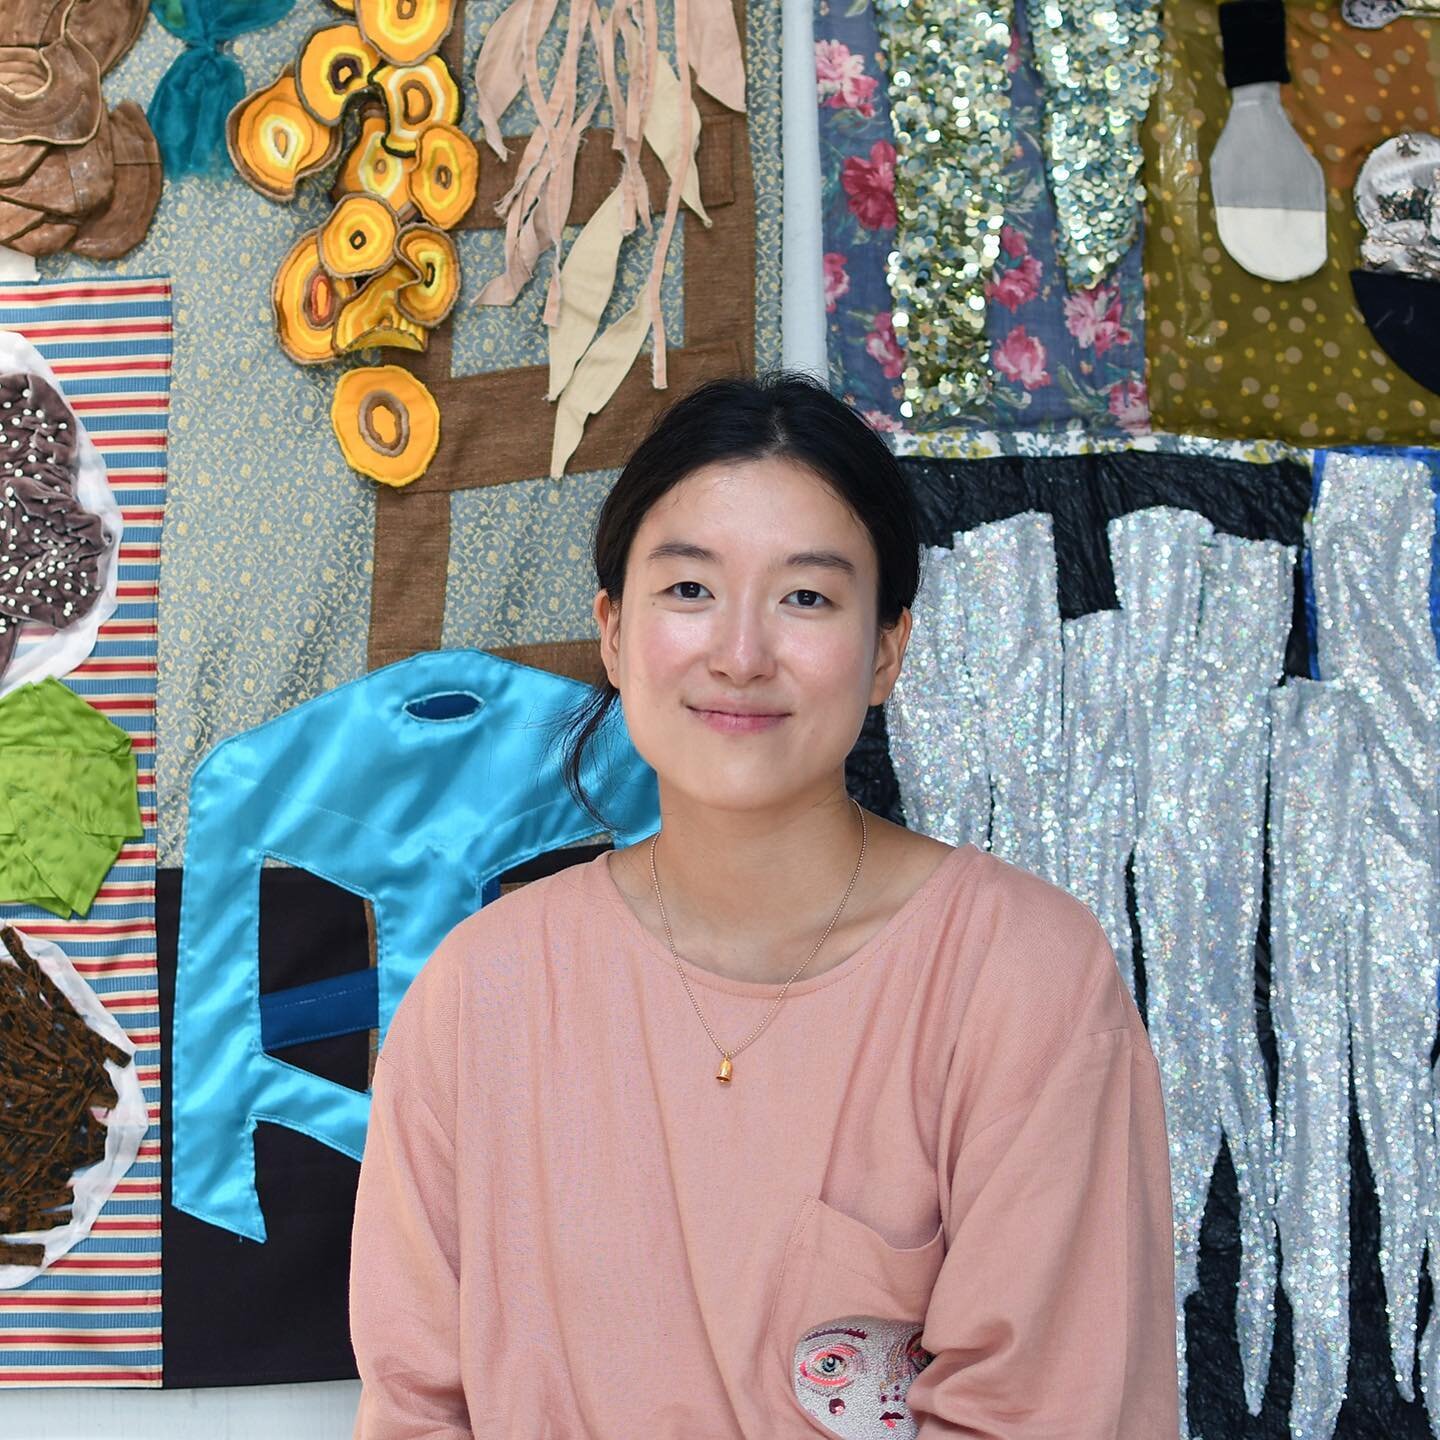 🎉It was wonderful to talk to the artist Woomin Kim @woominpkim for Mint Tea&rsquo;s twenty-ninth interview🎉

Woomin Kim is a Korean artist currently based in Queens, NY. Through her textile and sculptural projects, she examines the pre-existing nar